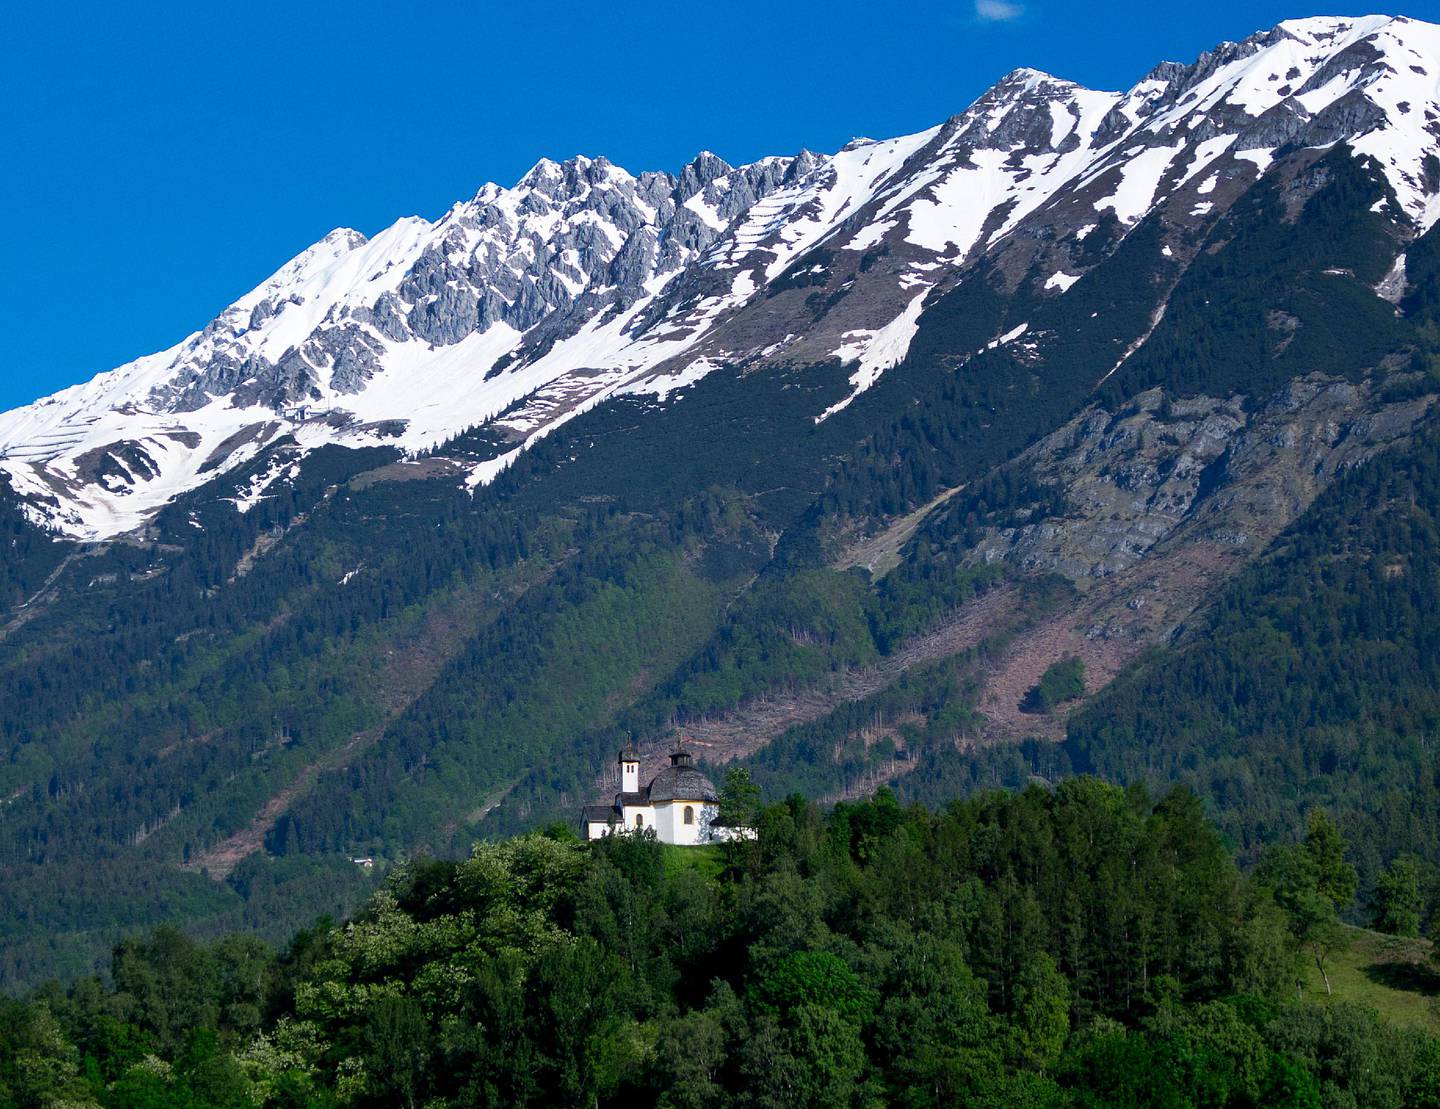 A small chapel stands on a hill in front of the North Chain mountains in Innsbruck, Austria, Saturday, June 1, 2019.  Snow persists on the peaks while lower slopes sport summer flowers with lush green fields. (AP Photo/Michael Probst)